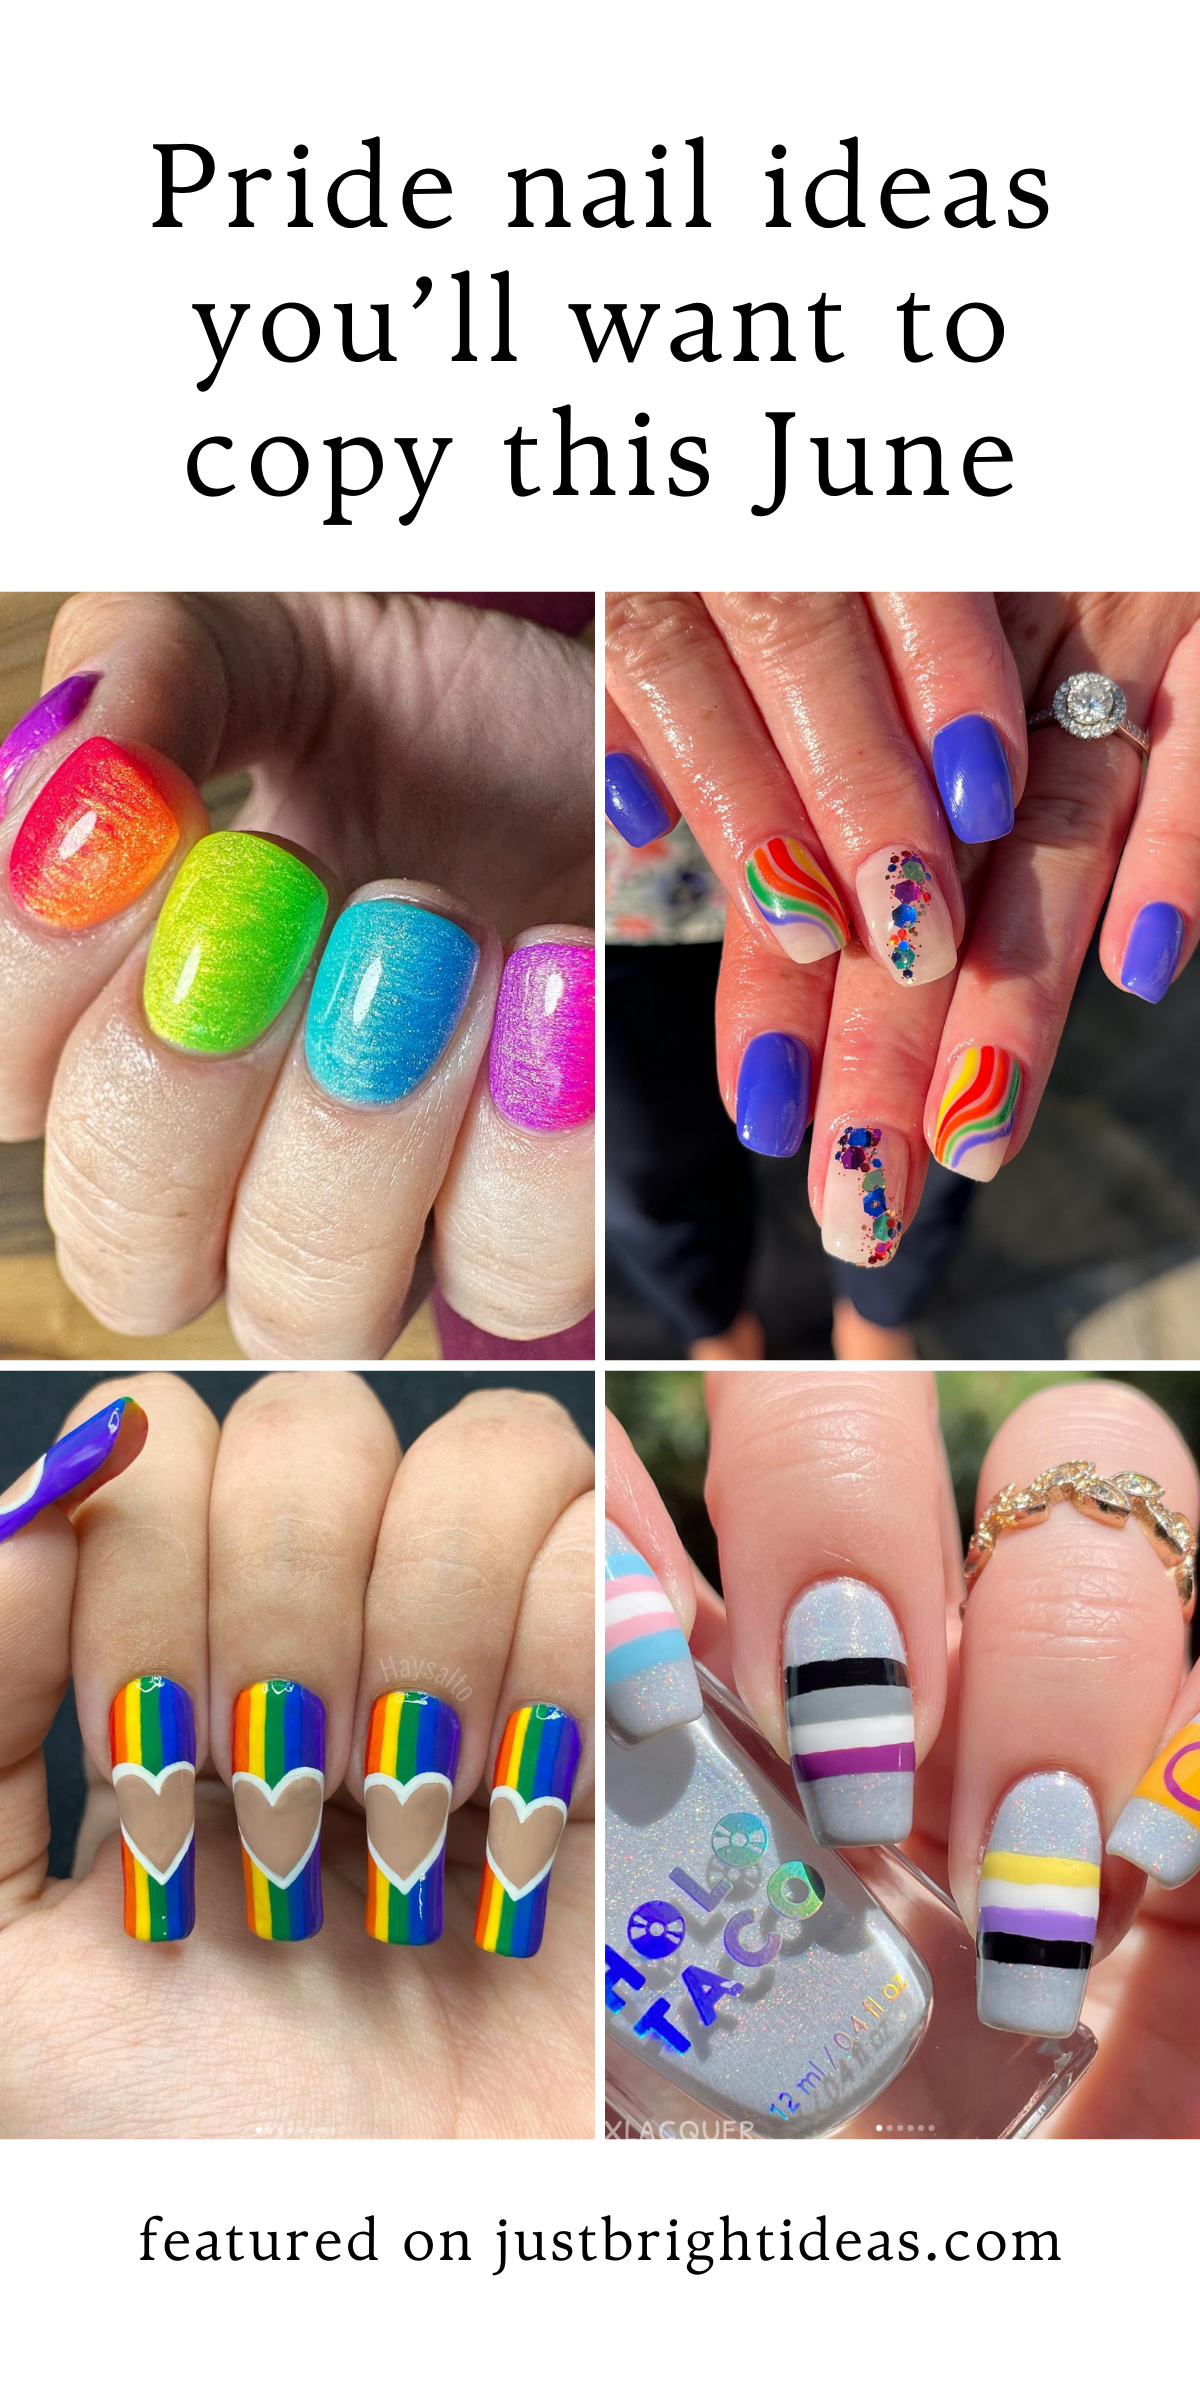 Painting the town rainbow, one nail at a time! 🌈💅 Embracing love, diversity, and all the glitter in between. 